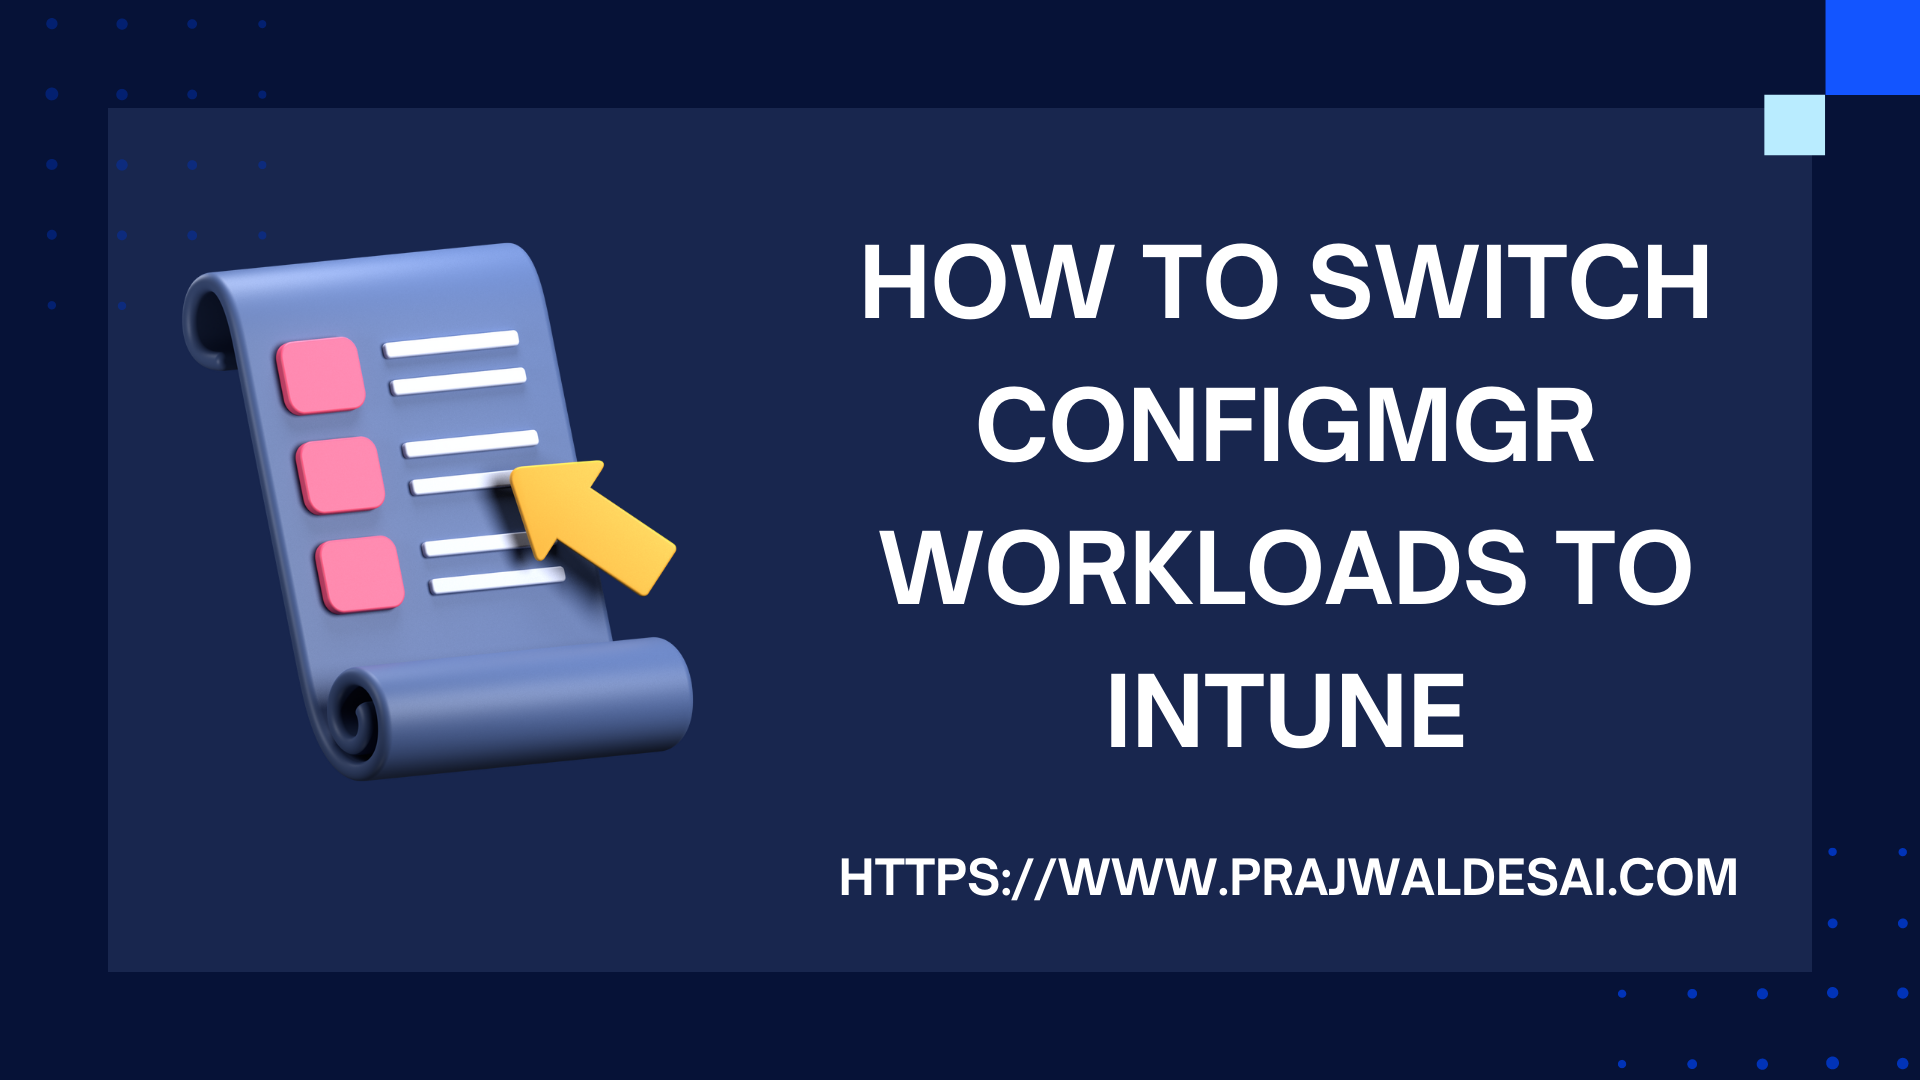 How to Switch SCCM workloads to Intune Co-Management